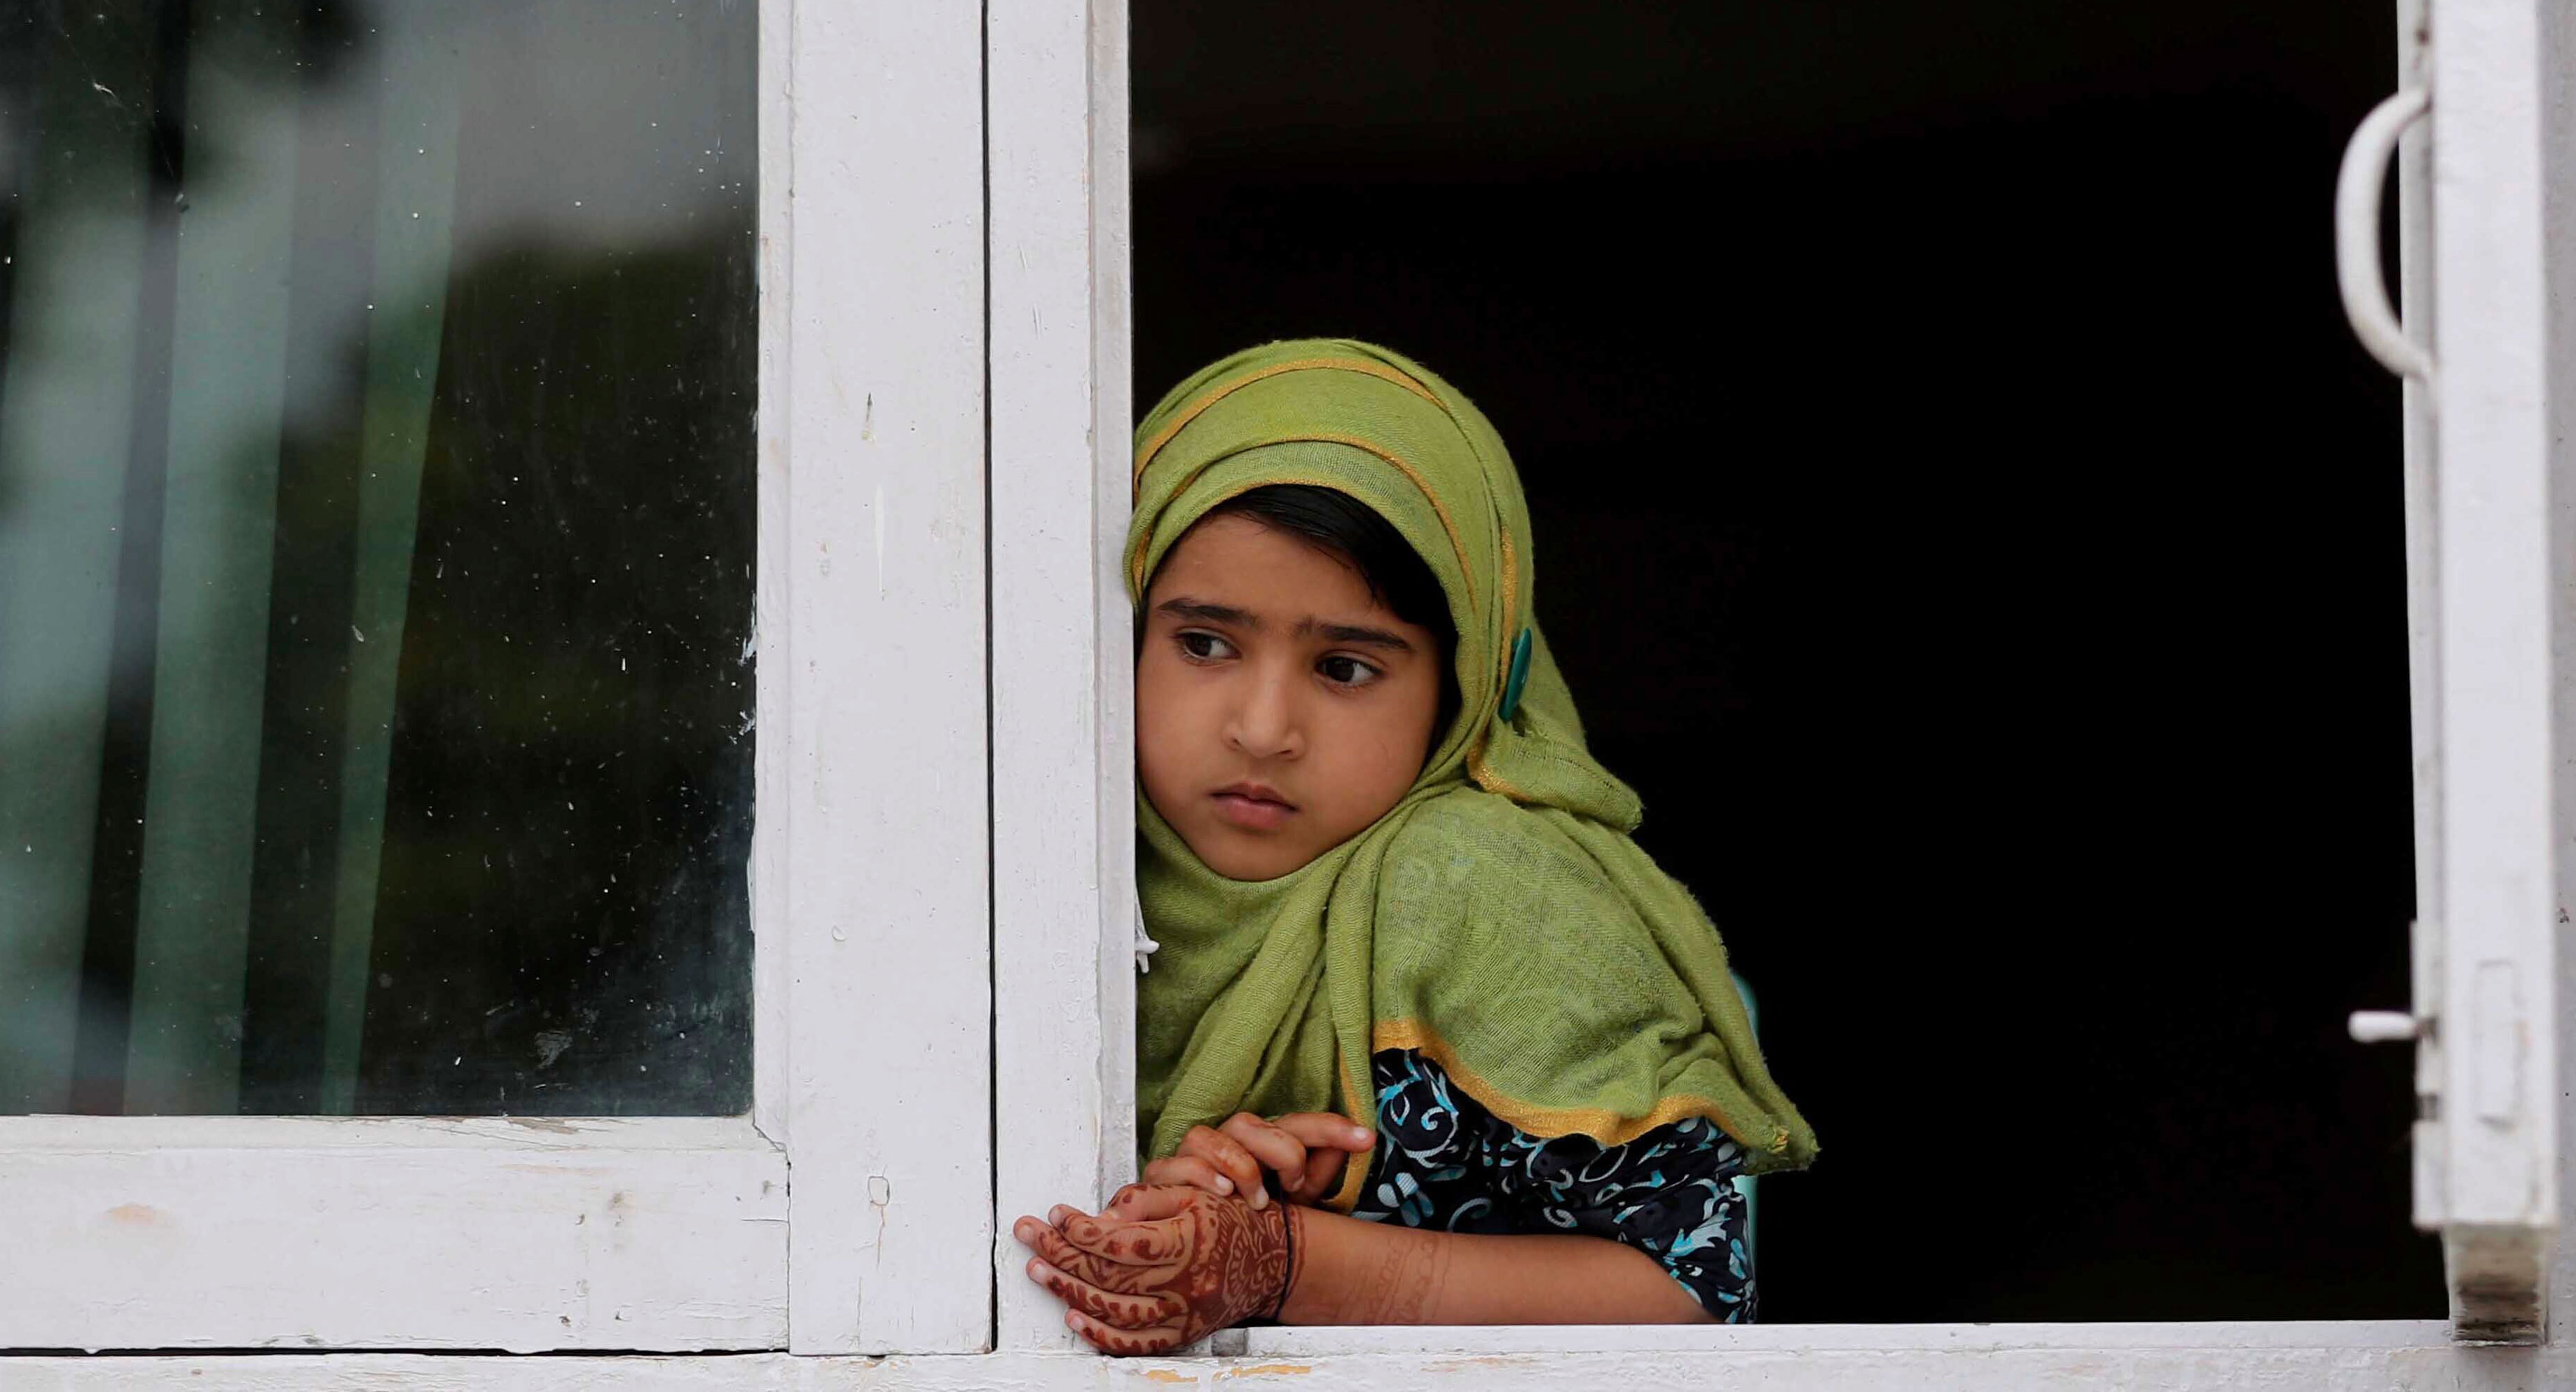 A Kashmiri child watches a protest in Srinagar on August 30, 2019. The sexual fantasies that have been unleashed around Kashmir — the top Google searches in India immediately after August 5 were ‘marry Kashmir girl’ and ‘Kashmiri girls’ — are not innocent. They are misogynistic. 